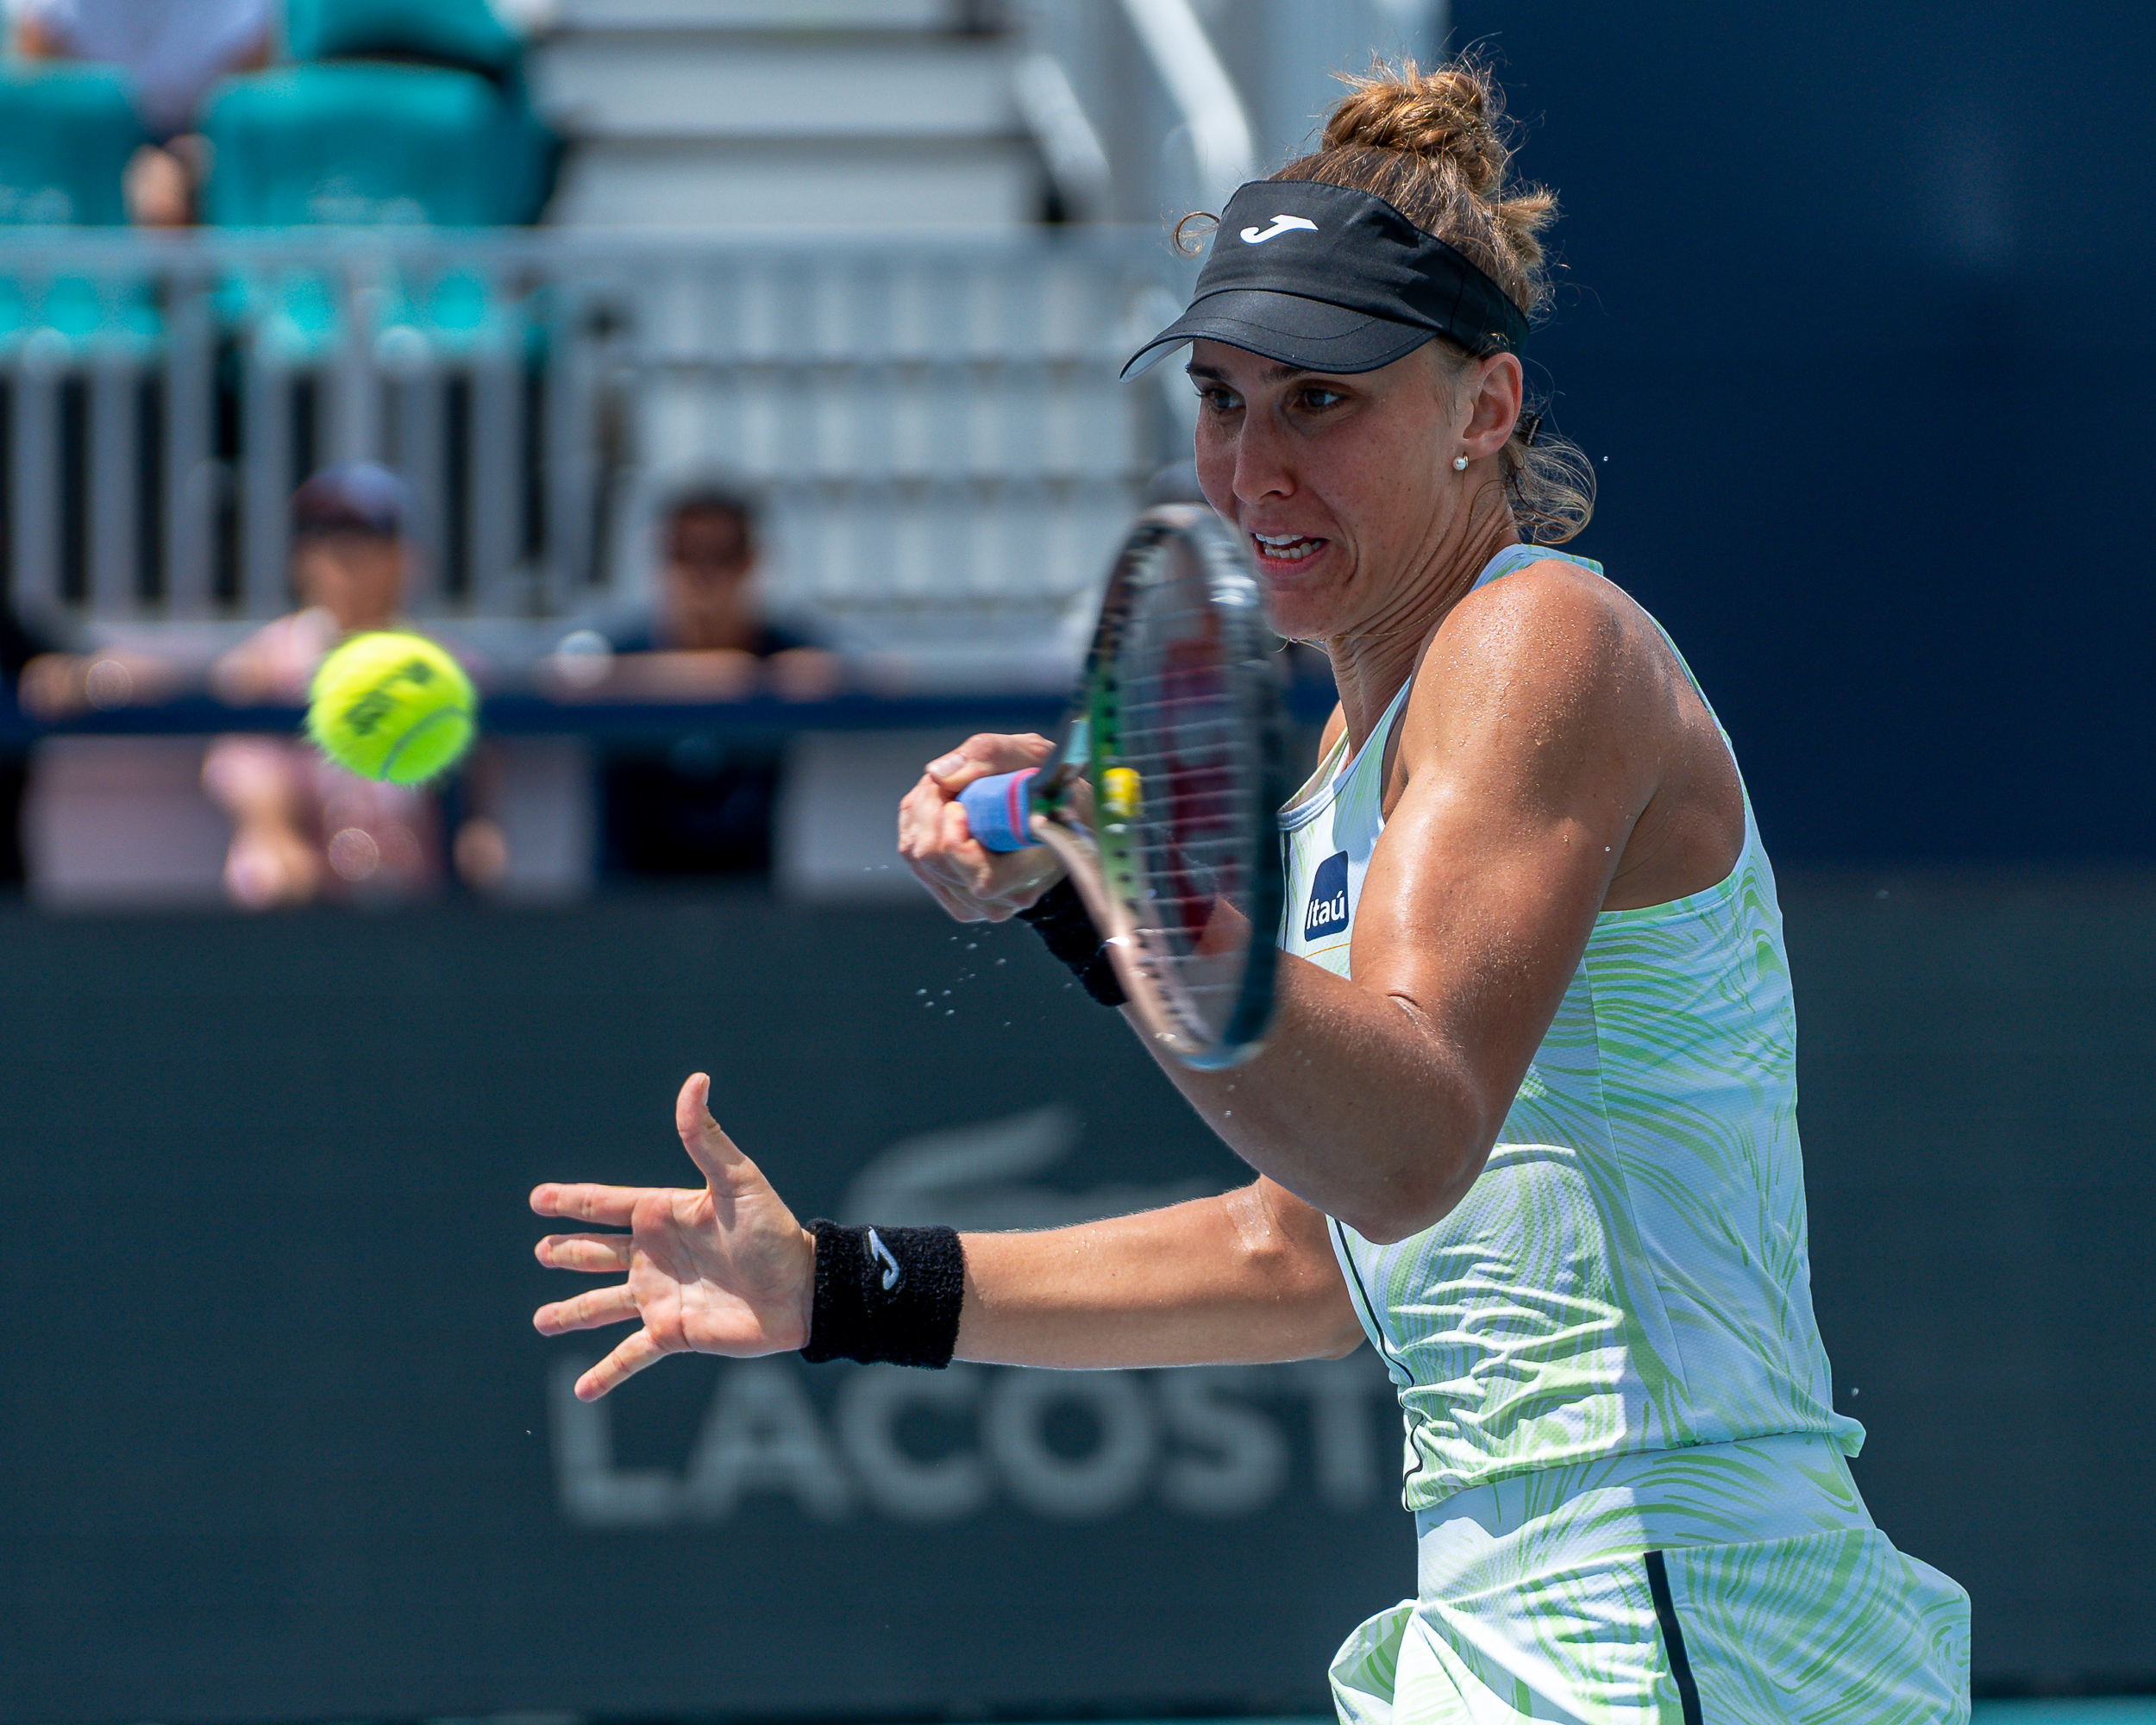 Beatriz Haddad Maia hits a forehand during her match against Jelena Ostapenko at the 2023 Miami Open